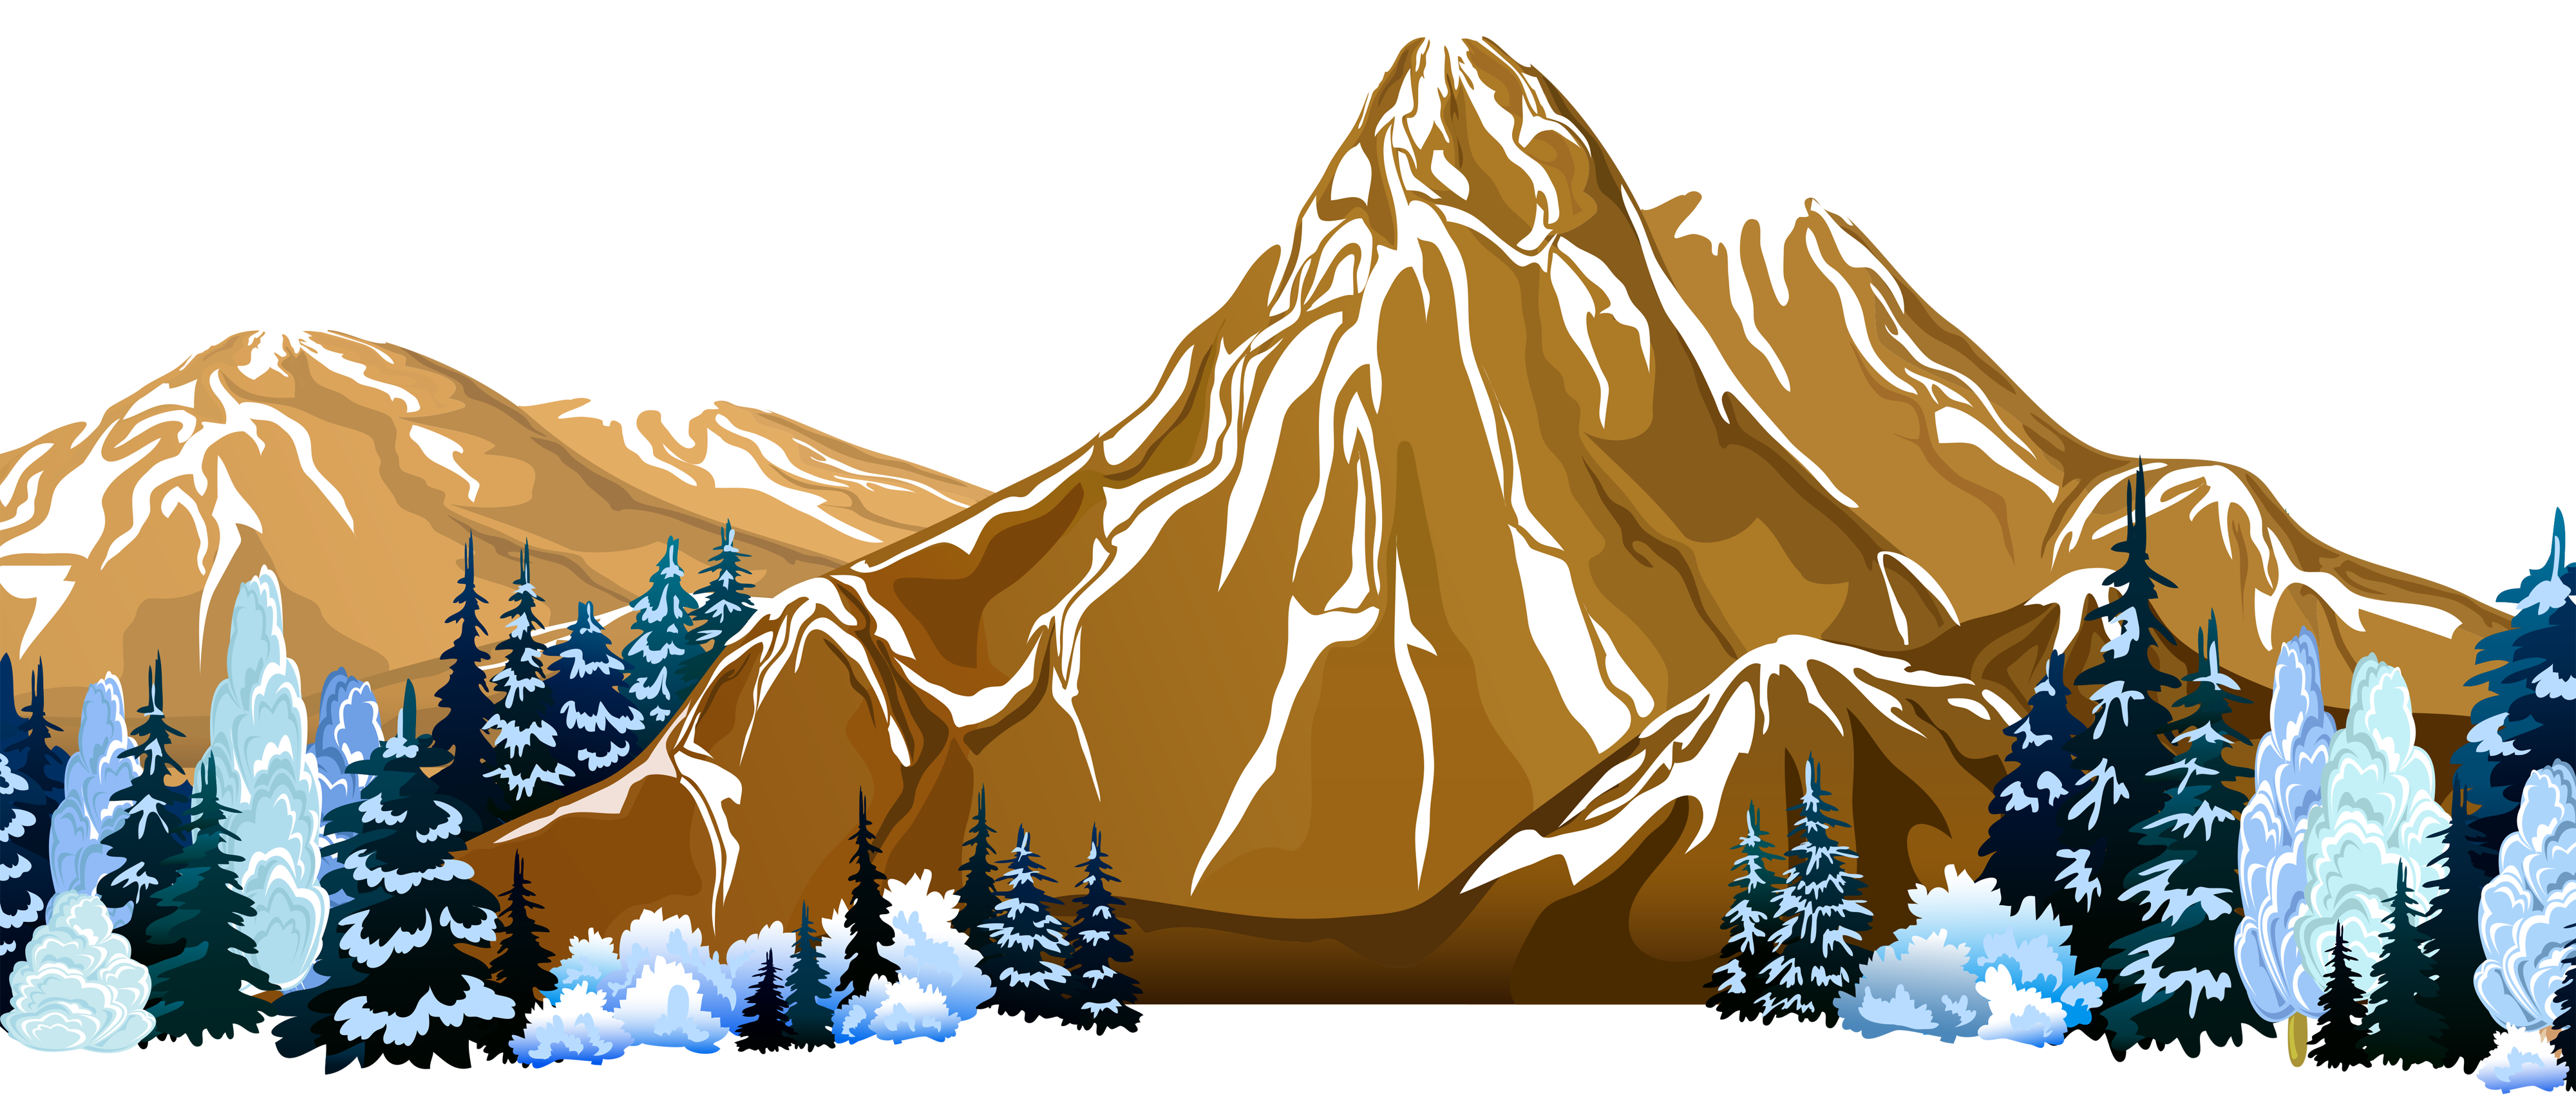 Mountain PNG Clipart images Free Download, Mountains PNG - Free